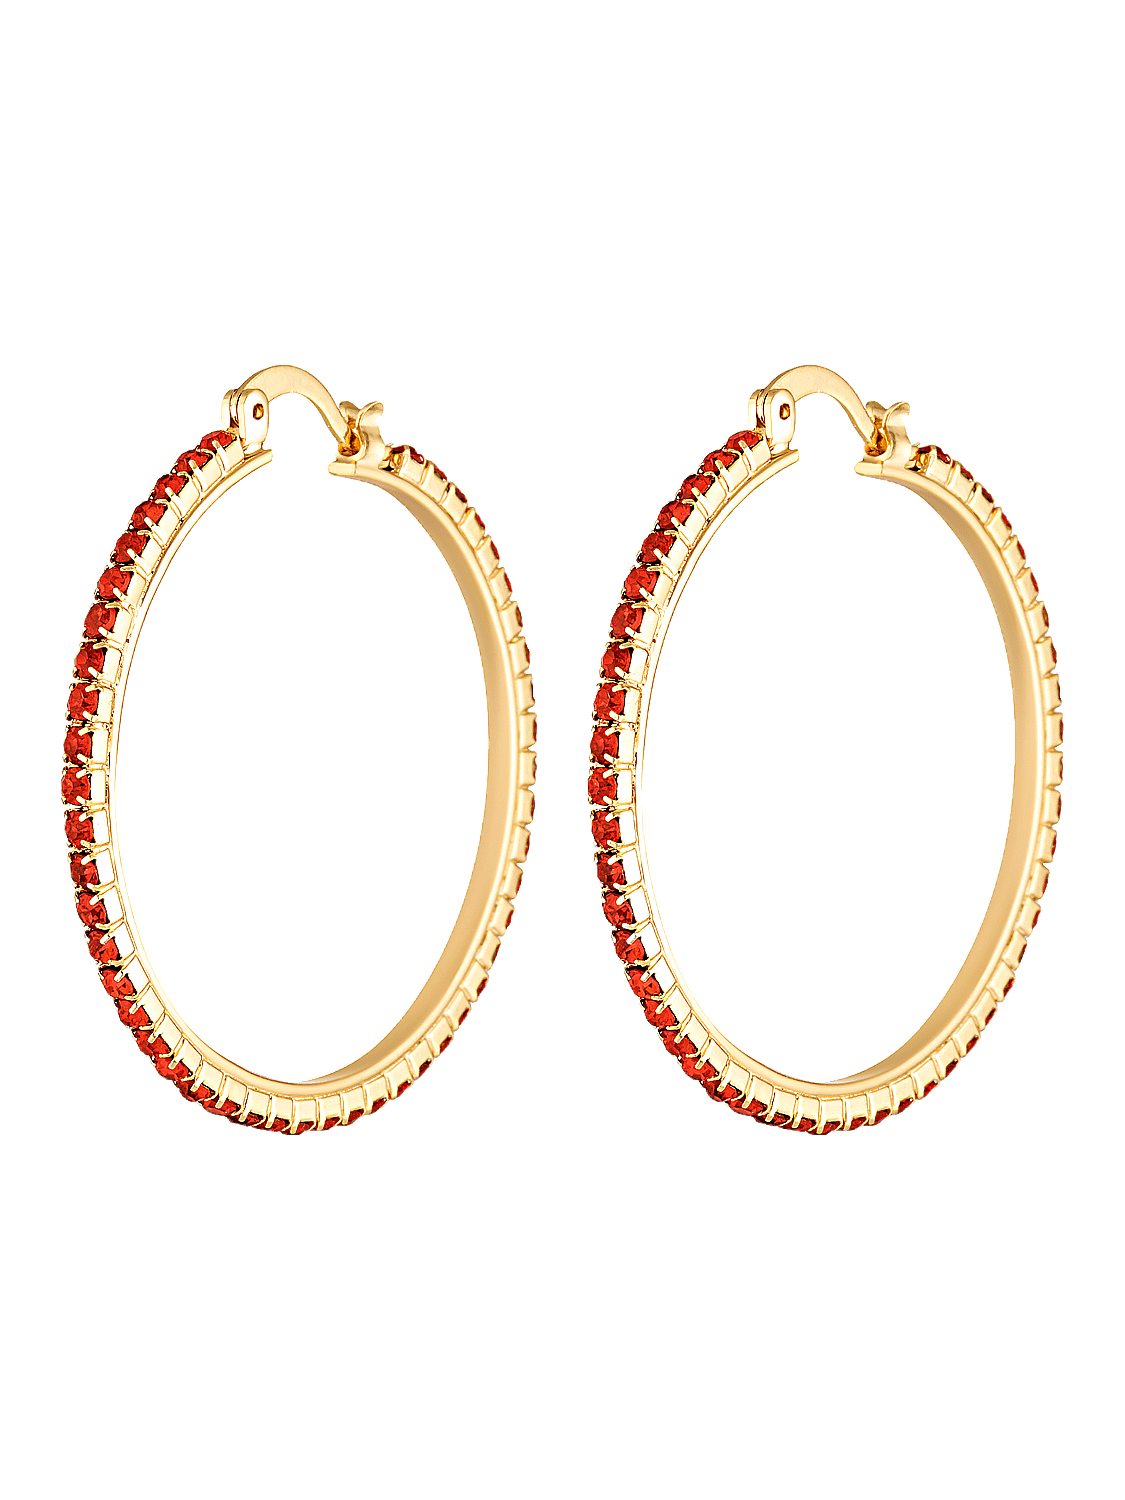 Gold and red hoops